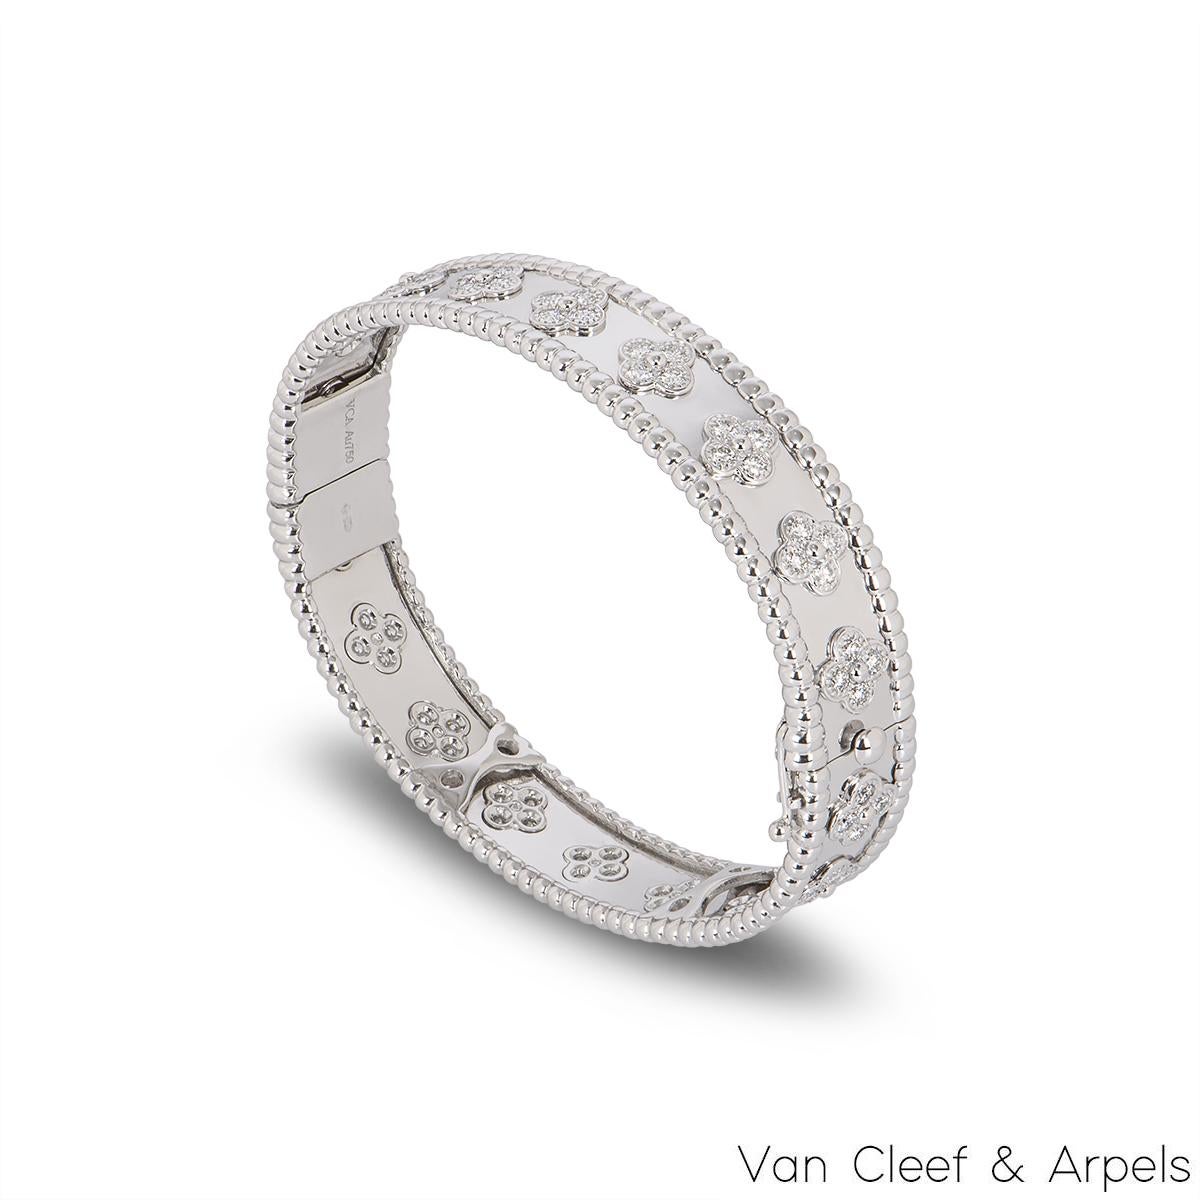 A stunning 18k white gold bracelet by Van Cleef & Arpels from the Perlée Clovers collection. The bracelet features 18 four leaf clover motifs, each set with 4 round brilliant cut diamonds, totalling approximately 1.61ct, D-F colour and IF-VVS